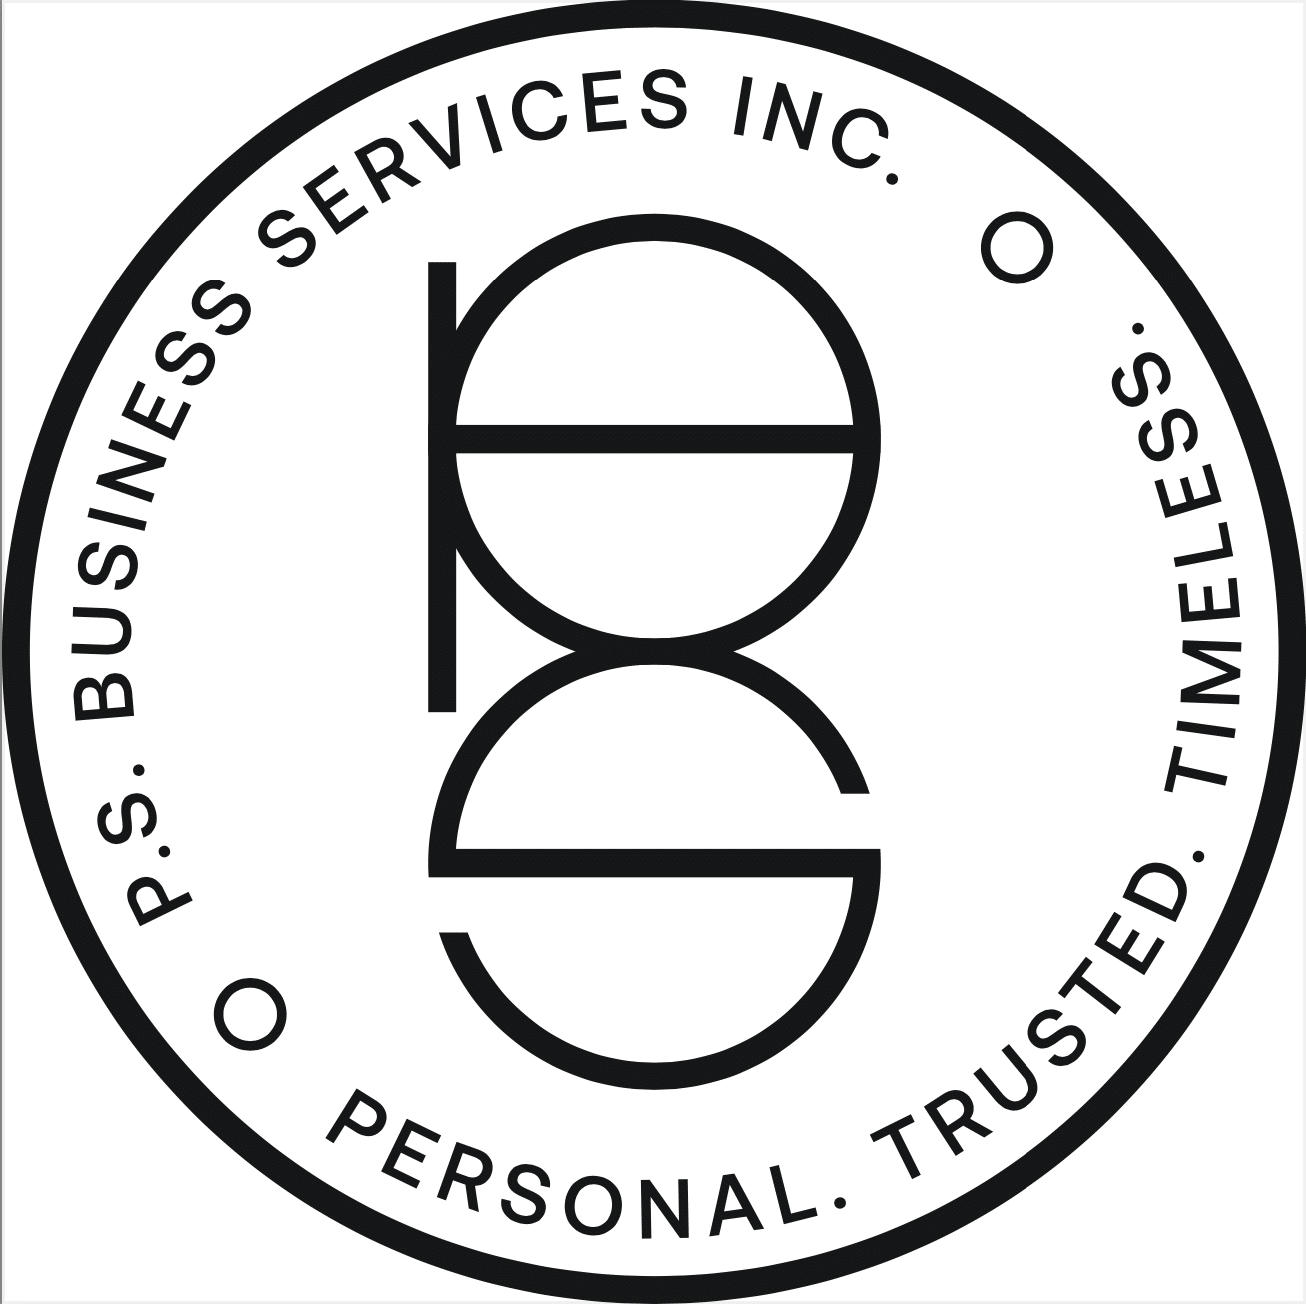 Logo for P.S. Business Services Inc.